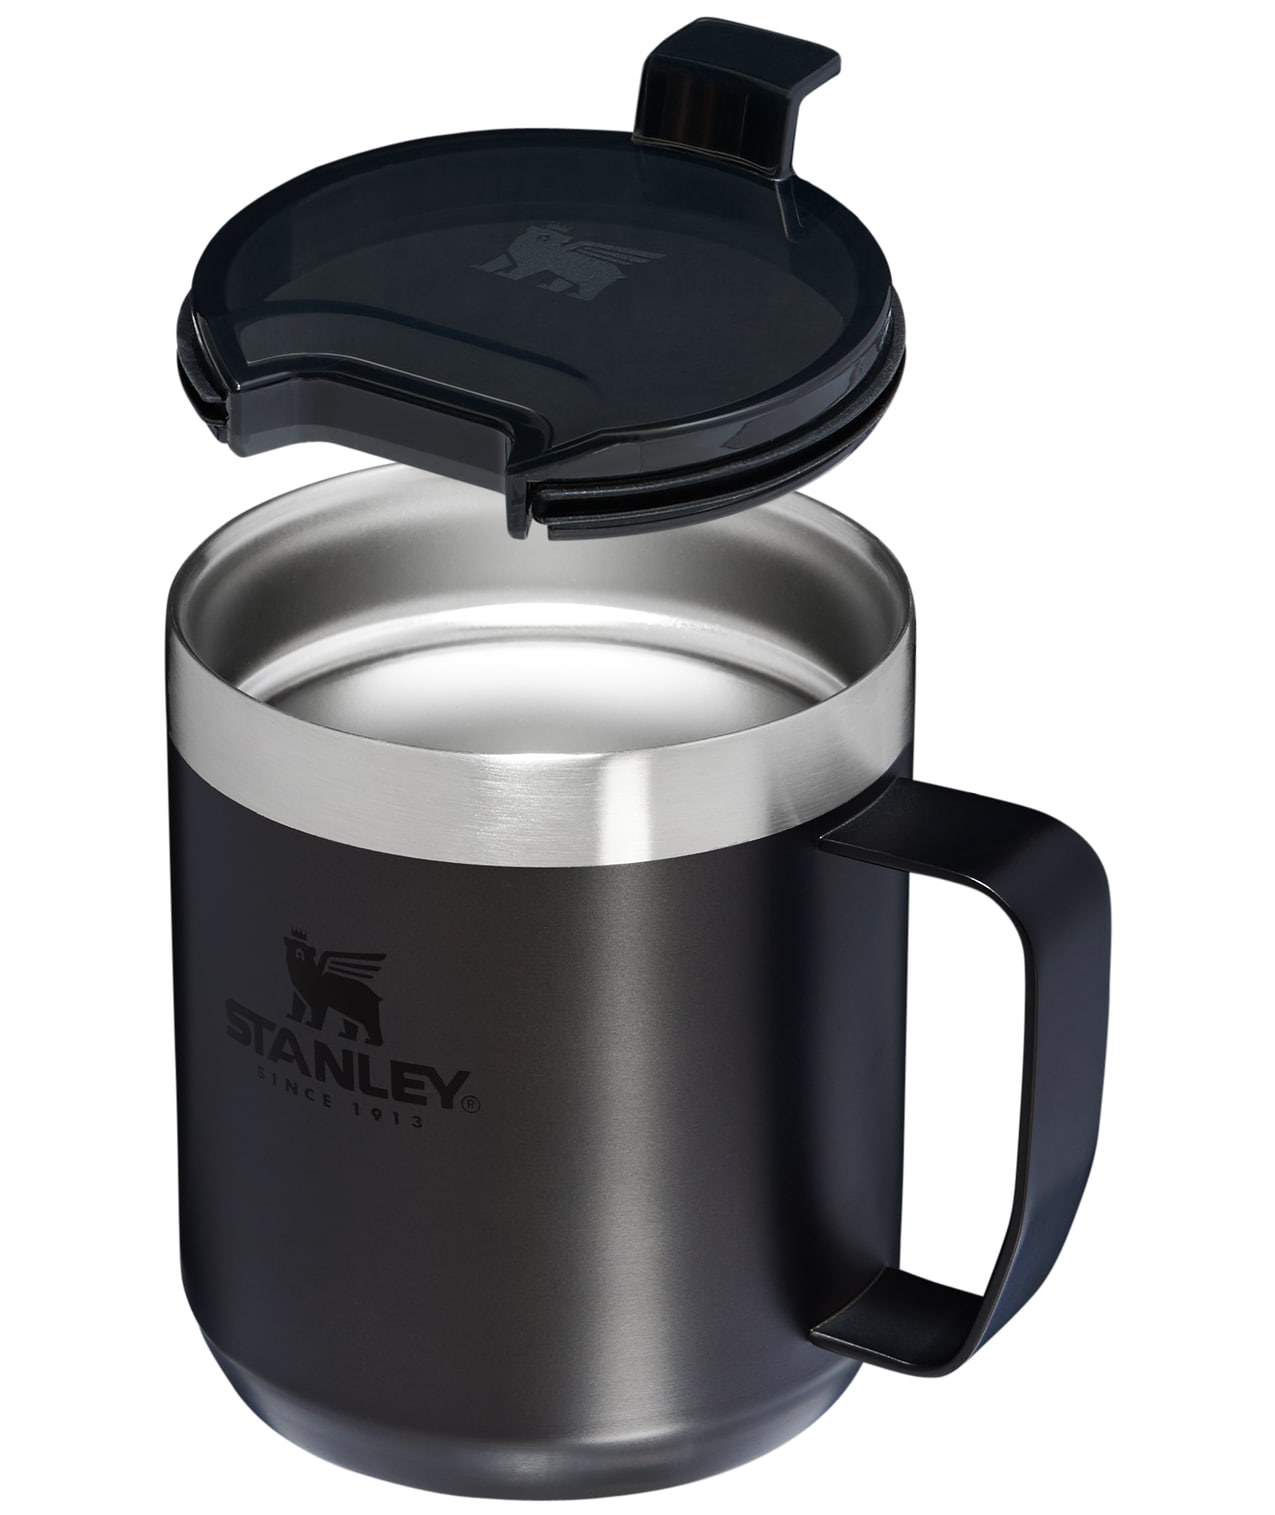 Stanley 12-fl oz Stainless Steel Insulated Travel Mug at